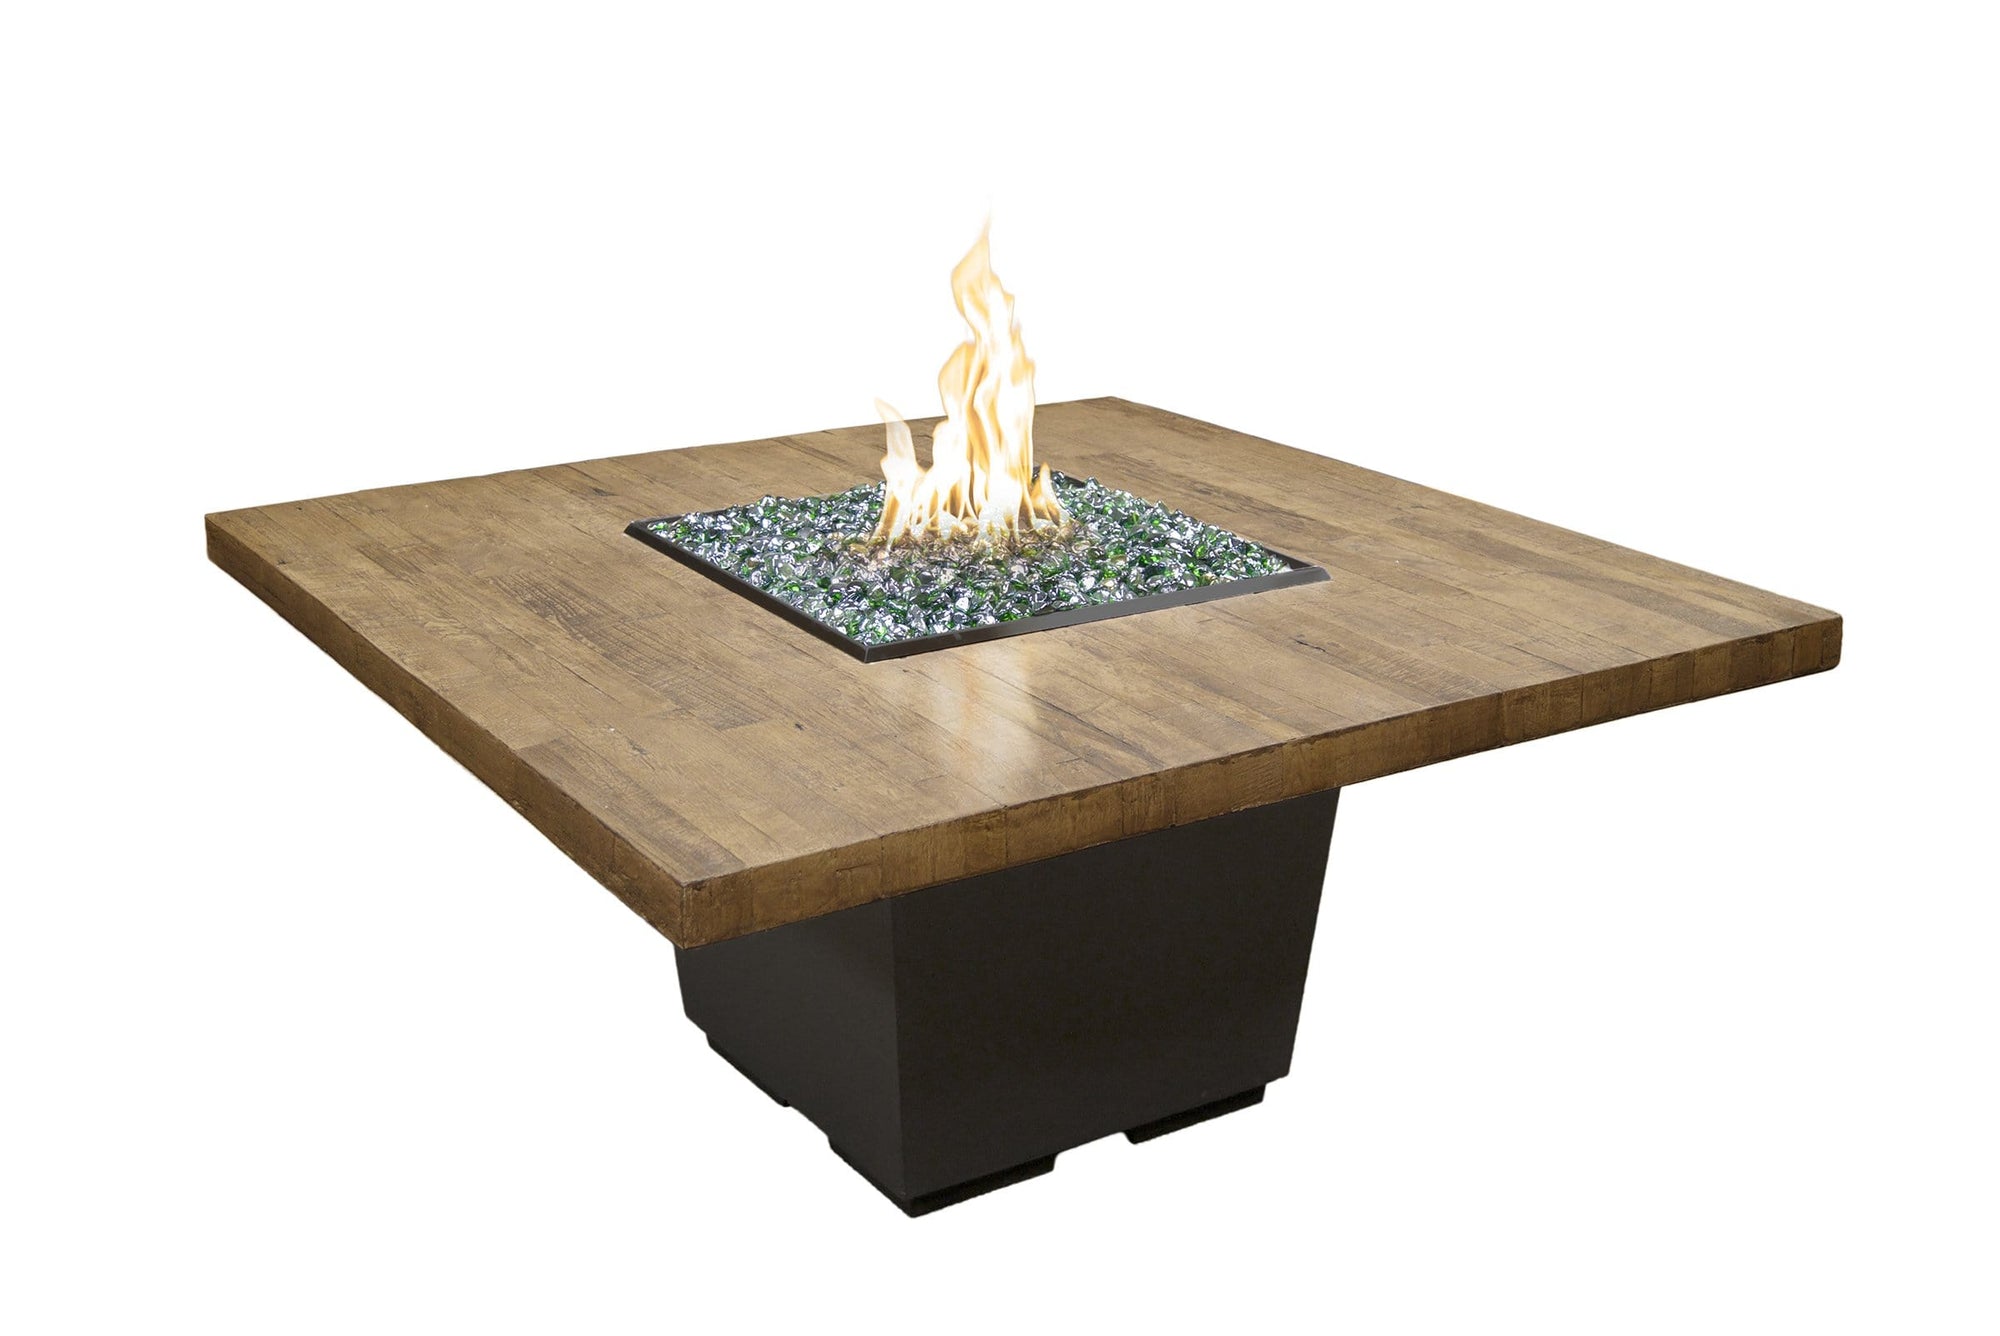 American Fyre Designs Fire Features American Fyre Designs 60" Reclaimed Wood Cosmopolitan Square Dining Gas Firetable / French Barrel Oak or Silver Pine / 642-BA-FO-M6NC, 642-BA-FO-M6PC, 642-BA-SP-M6NC, 642-BA-SP-M6PC, 642-BA-FO-F6NC, 642-BA-FO-F6PC, 642-BA-SP-F6NC, or 642-BA-SP-F6PC